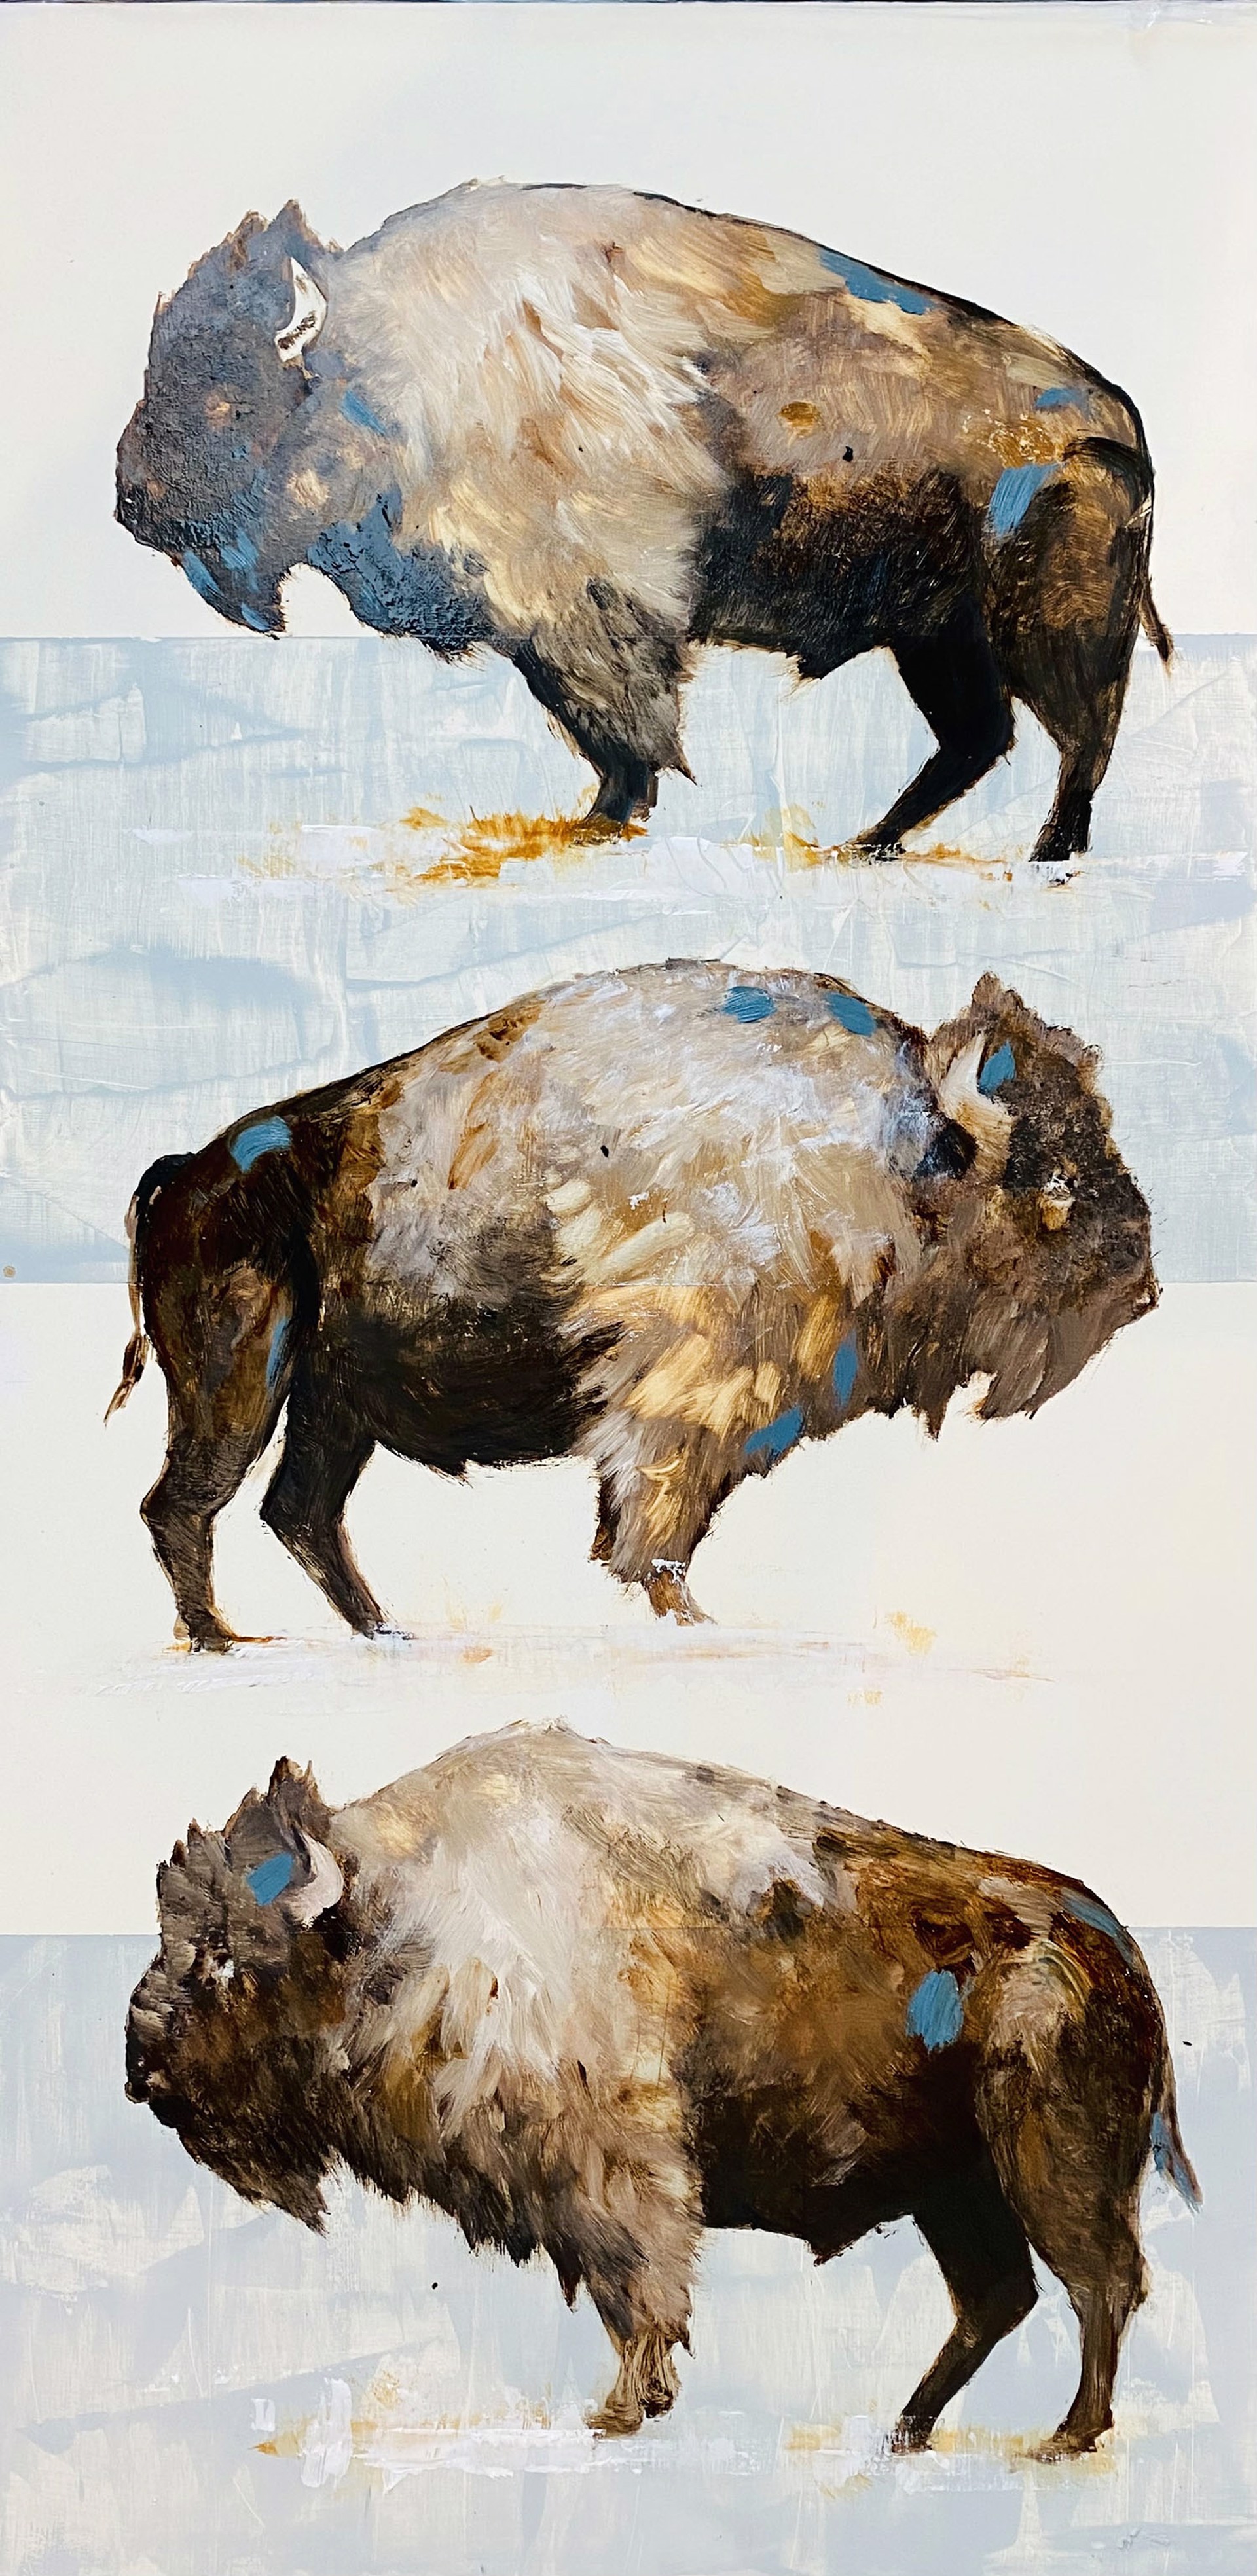 Original Oil Painting By Jenna Von Benedikt Of A Bison On An Abstract Background